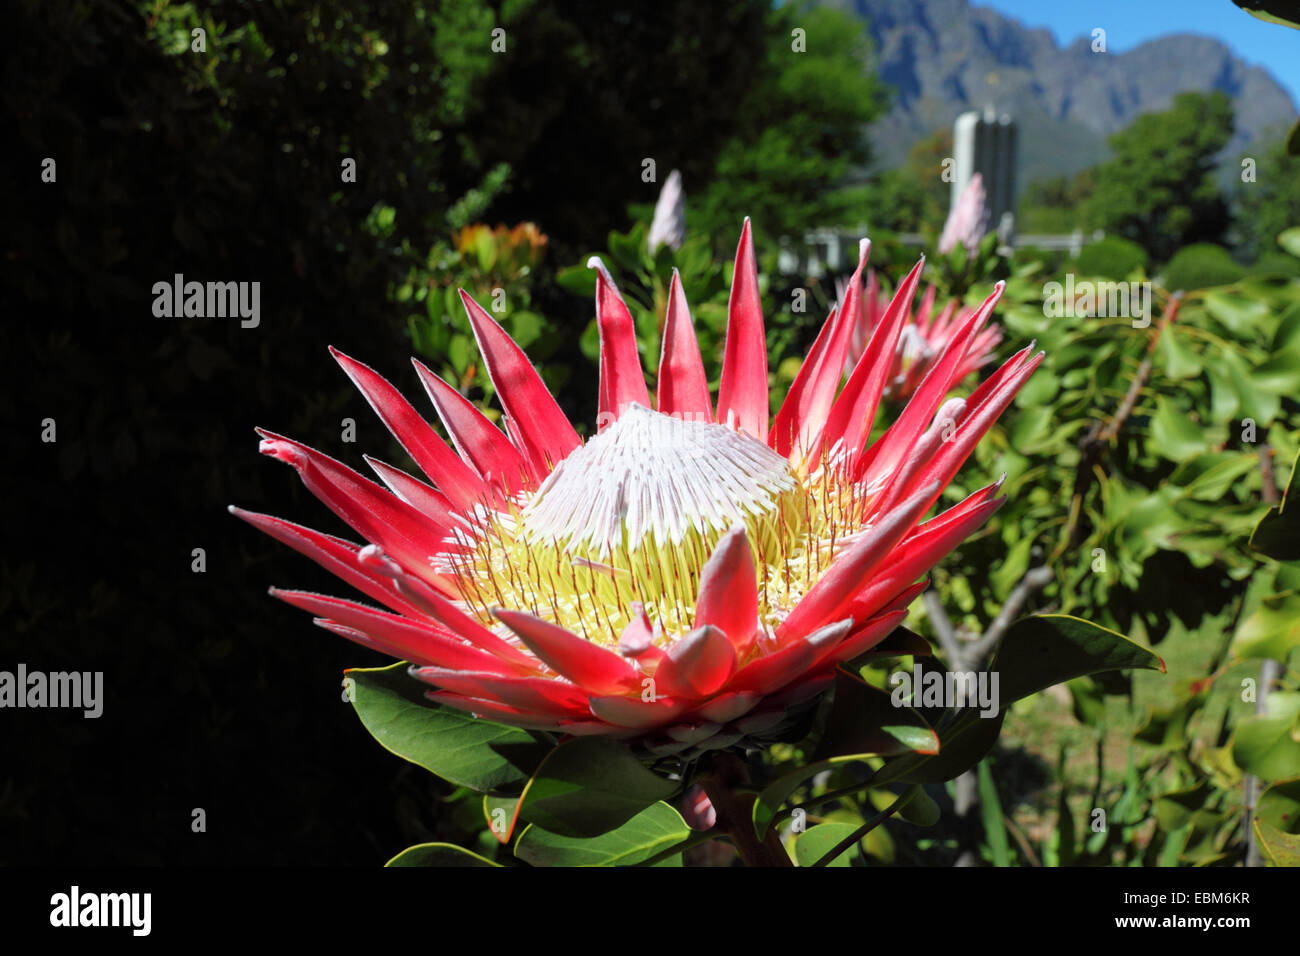 A King Protea flower (Protea cynaroides), Hugenot Monument, Franschhoek, South Africa. Stock Photo